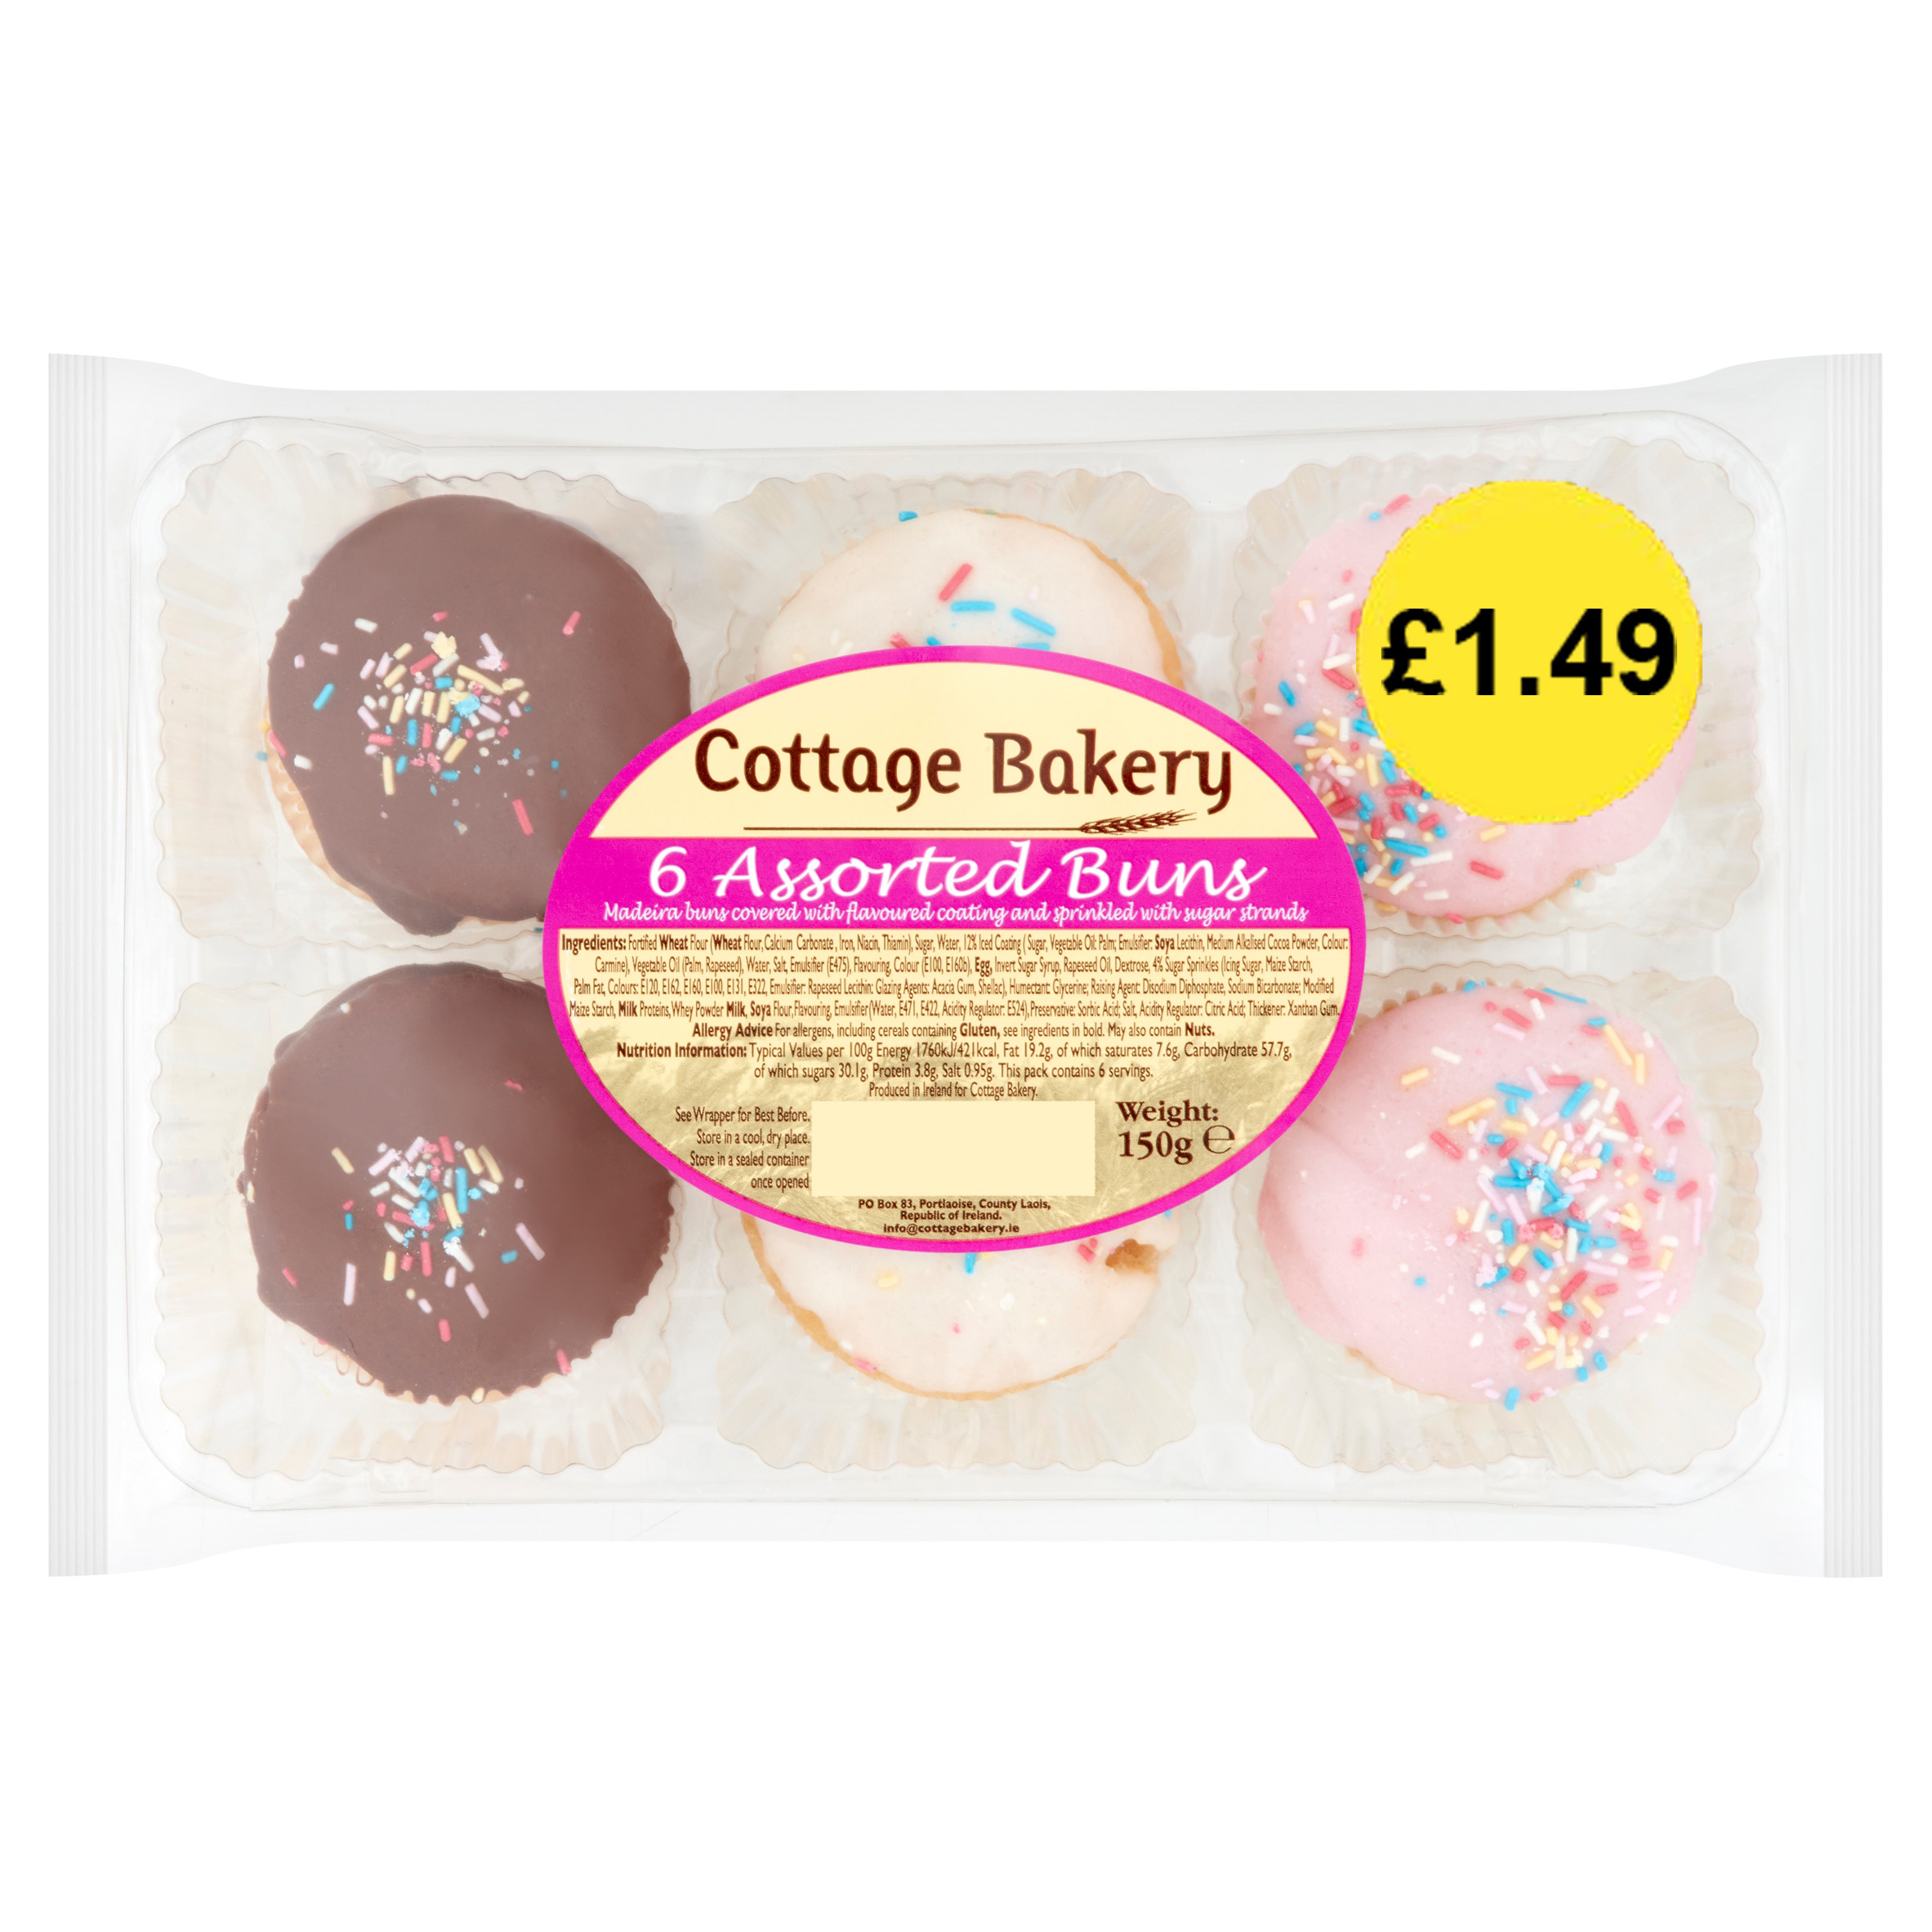 Cottage Bakery 6 Assorted Buns (Jan - Oct 23) RRP £1.49 CLEARANCE XL 89p each or 2 for £1.50